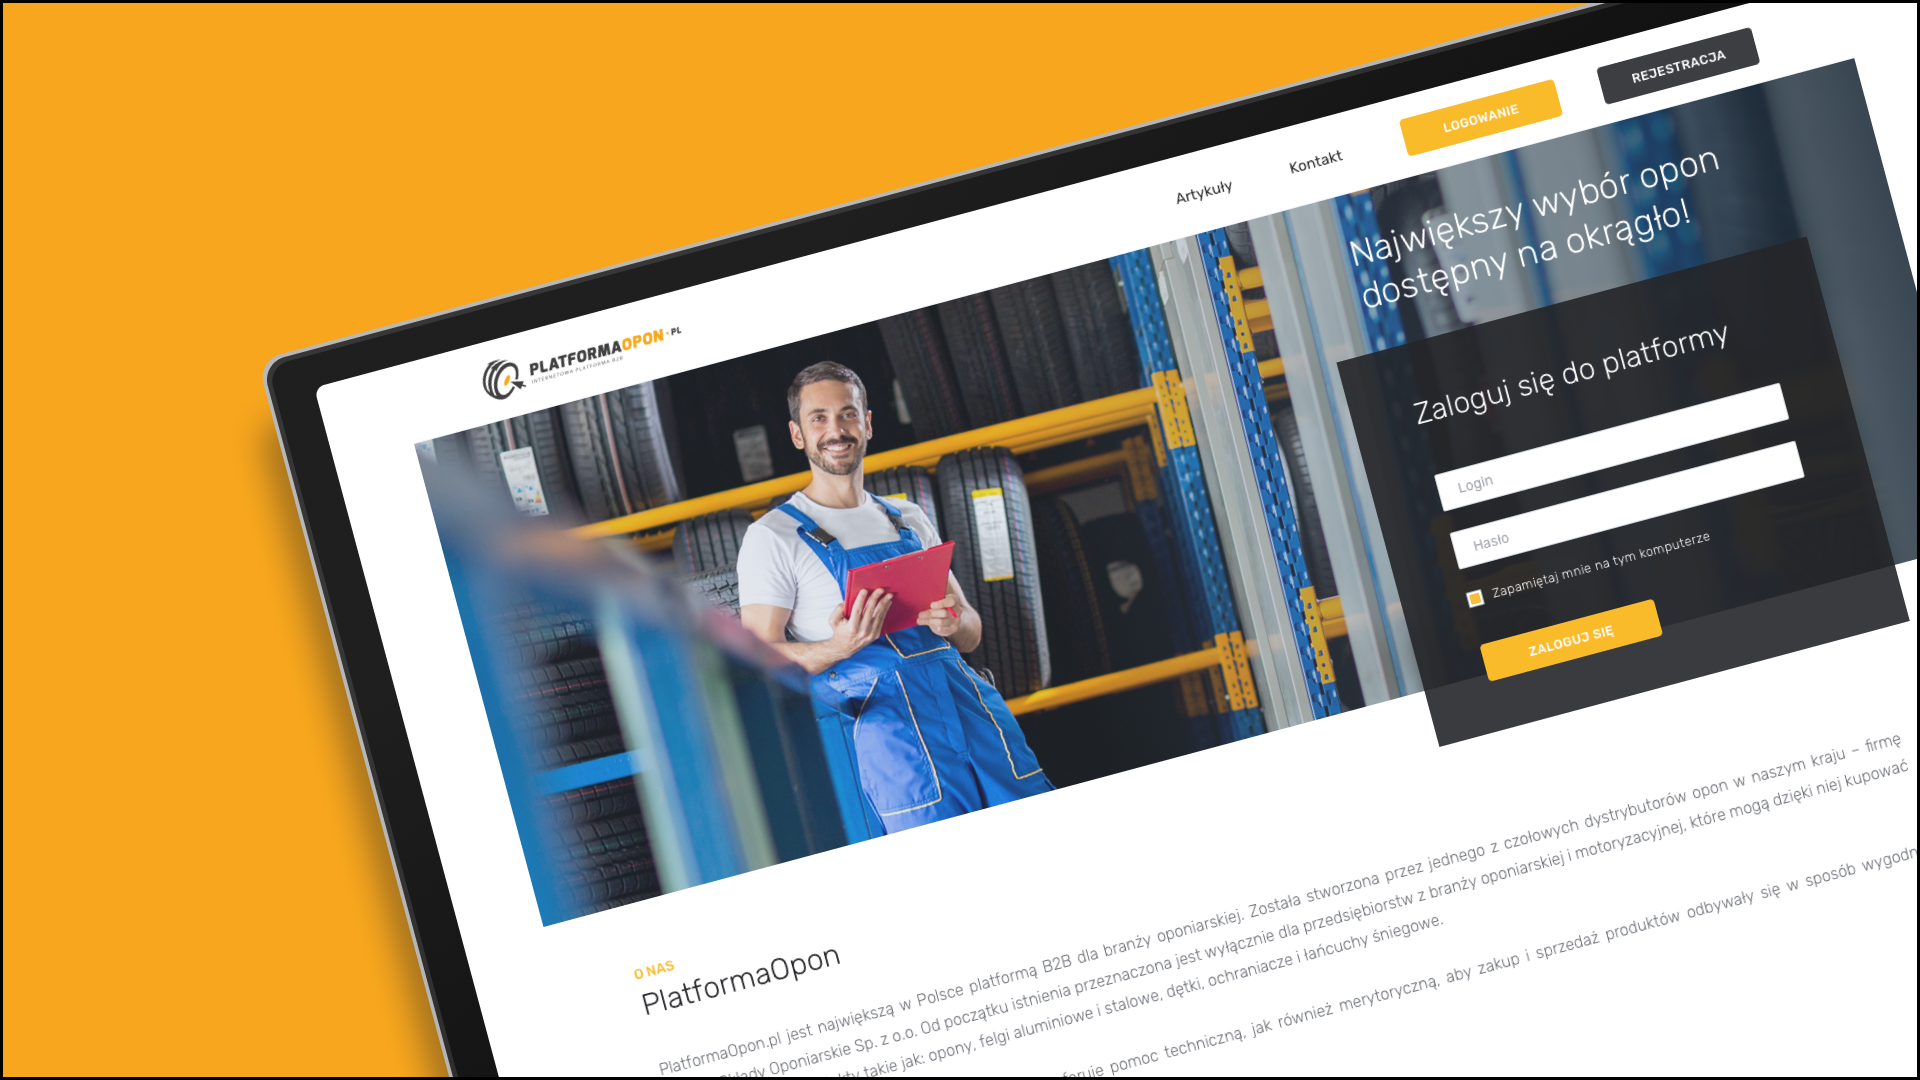 A monitor displaying a web page with a vibrant orange and white color scheme, featuring 'PLATFORMAOPON.PL' at the top left corner. The webpage includes a photo of a smiling worker in blue overalls holding a clipboard, standing in a warehouse with stacks of tires. Below is more Polish text providing information about the platform.